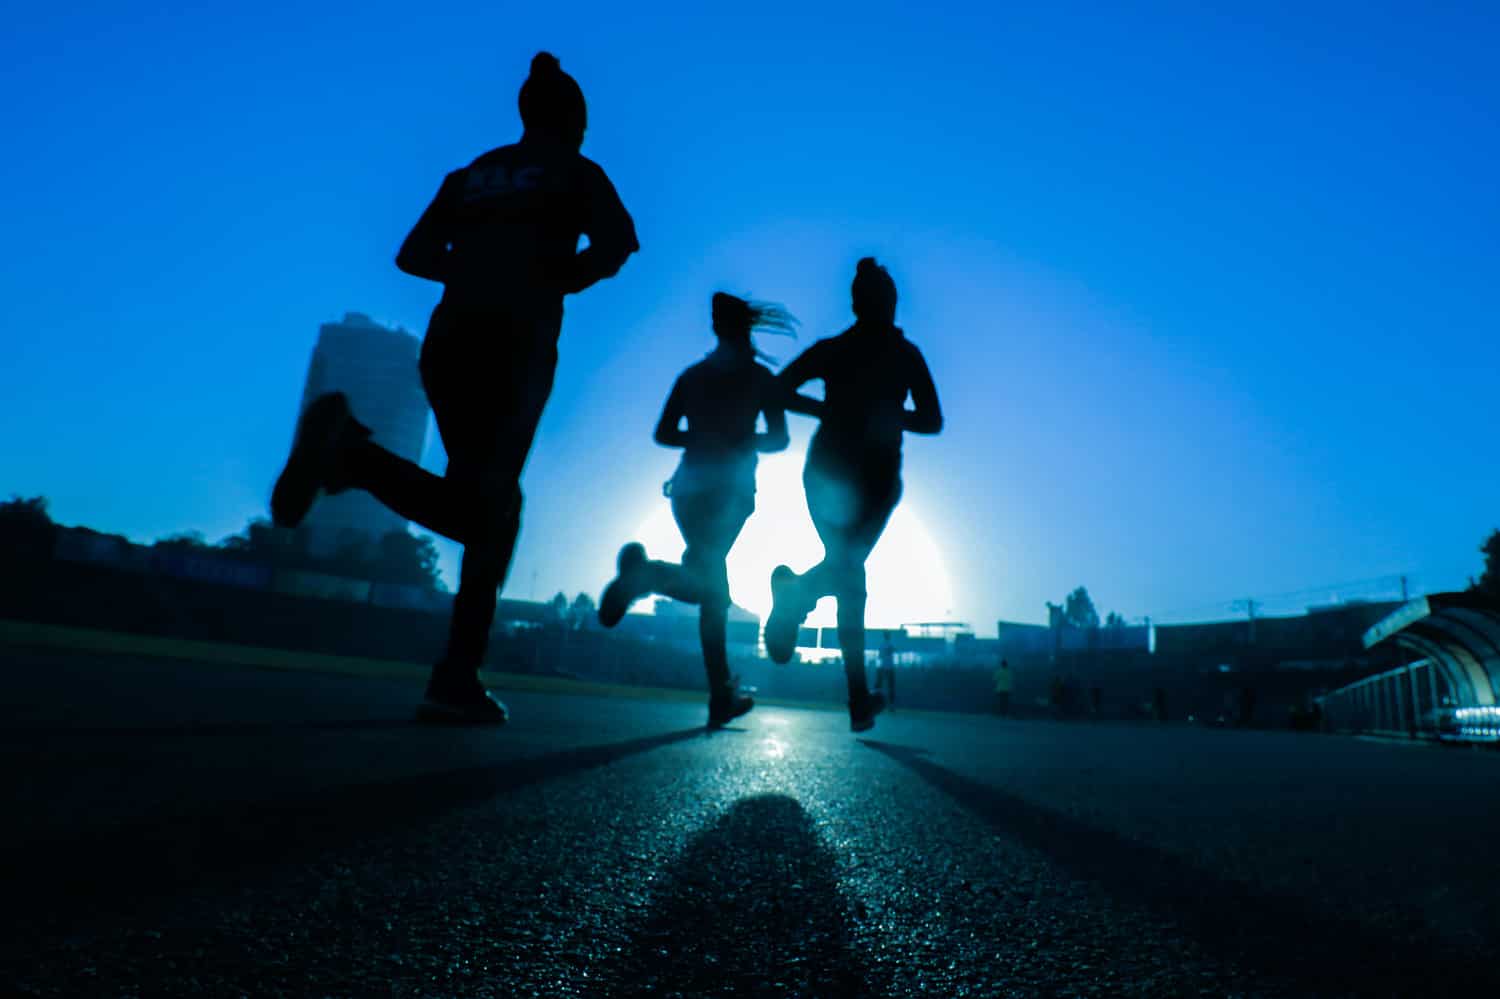 Group of runners at dusk in a city